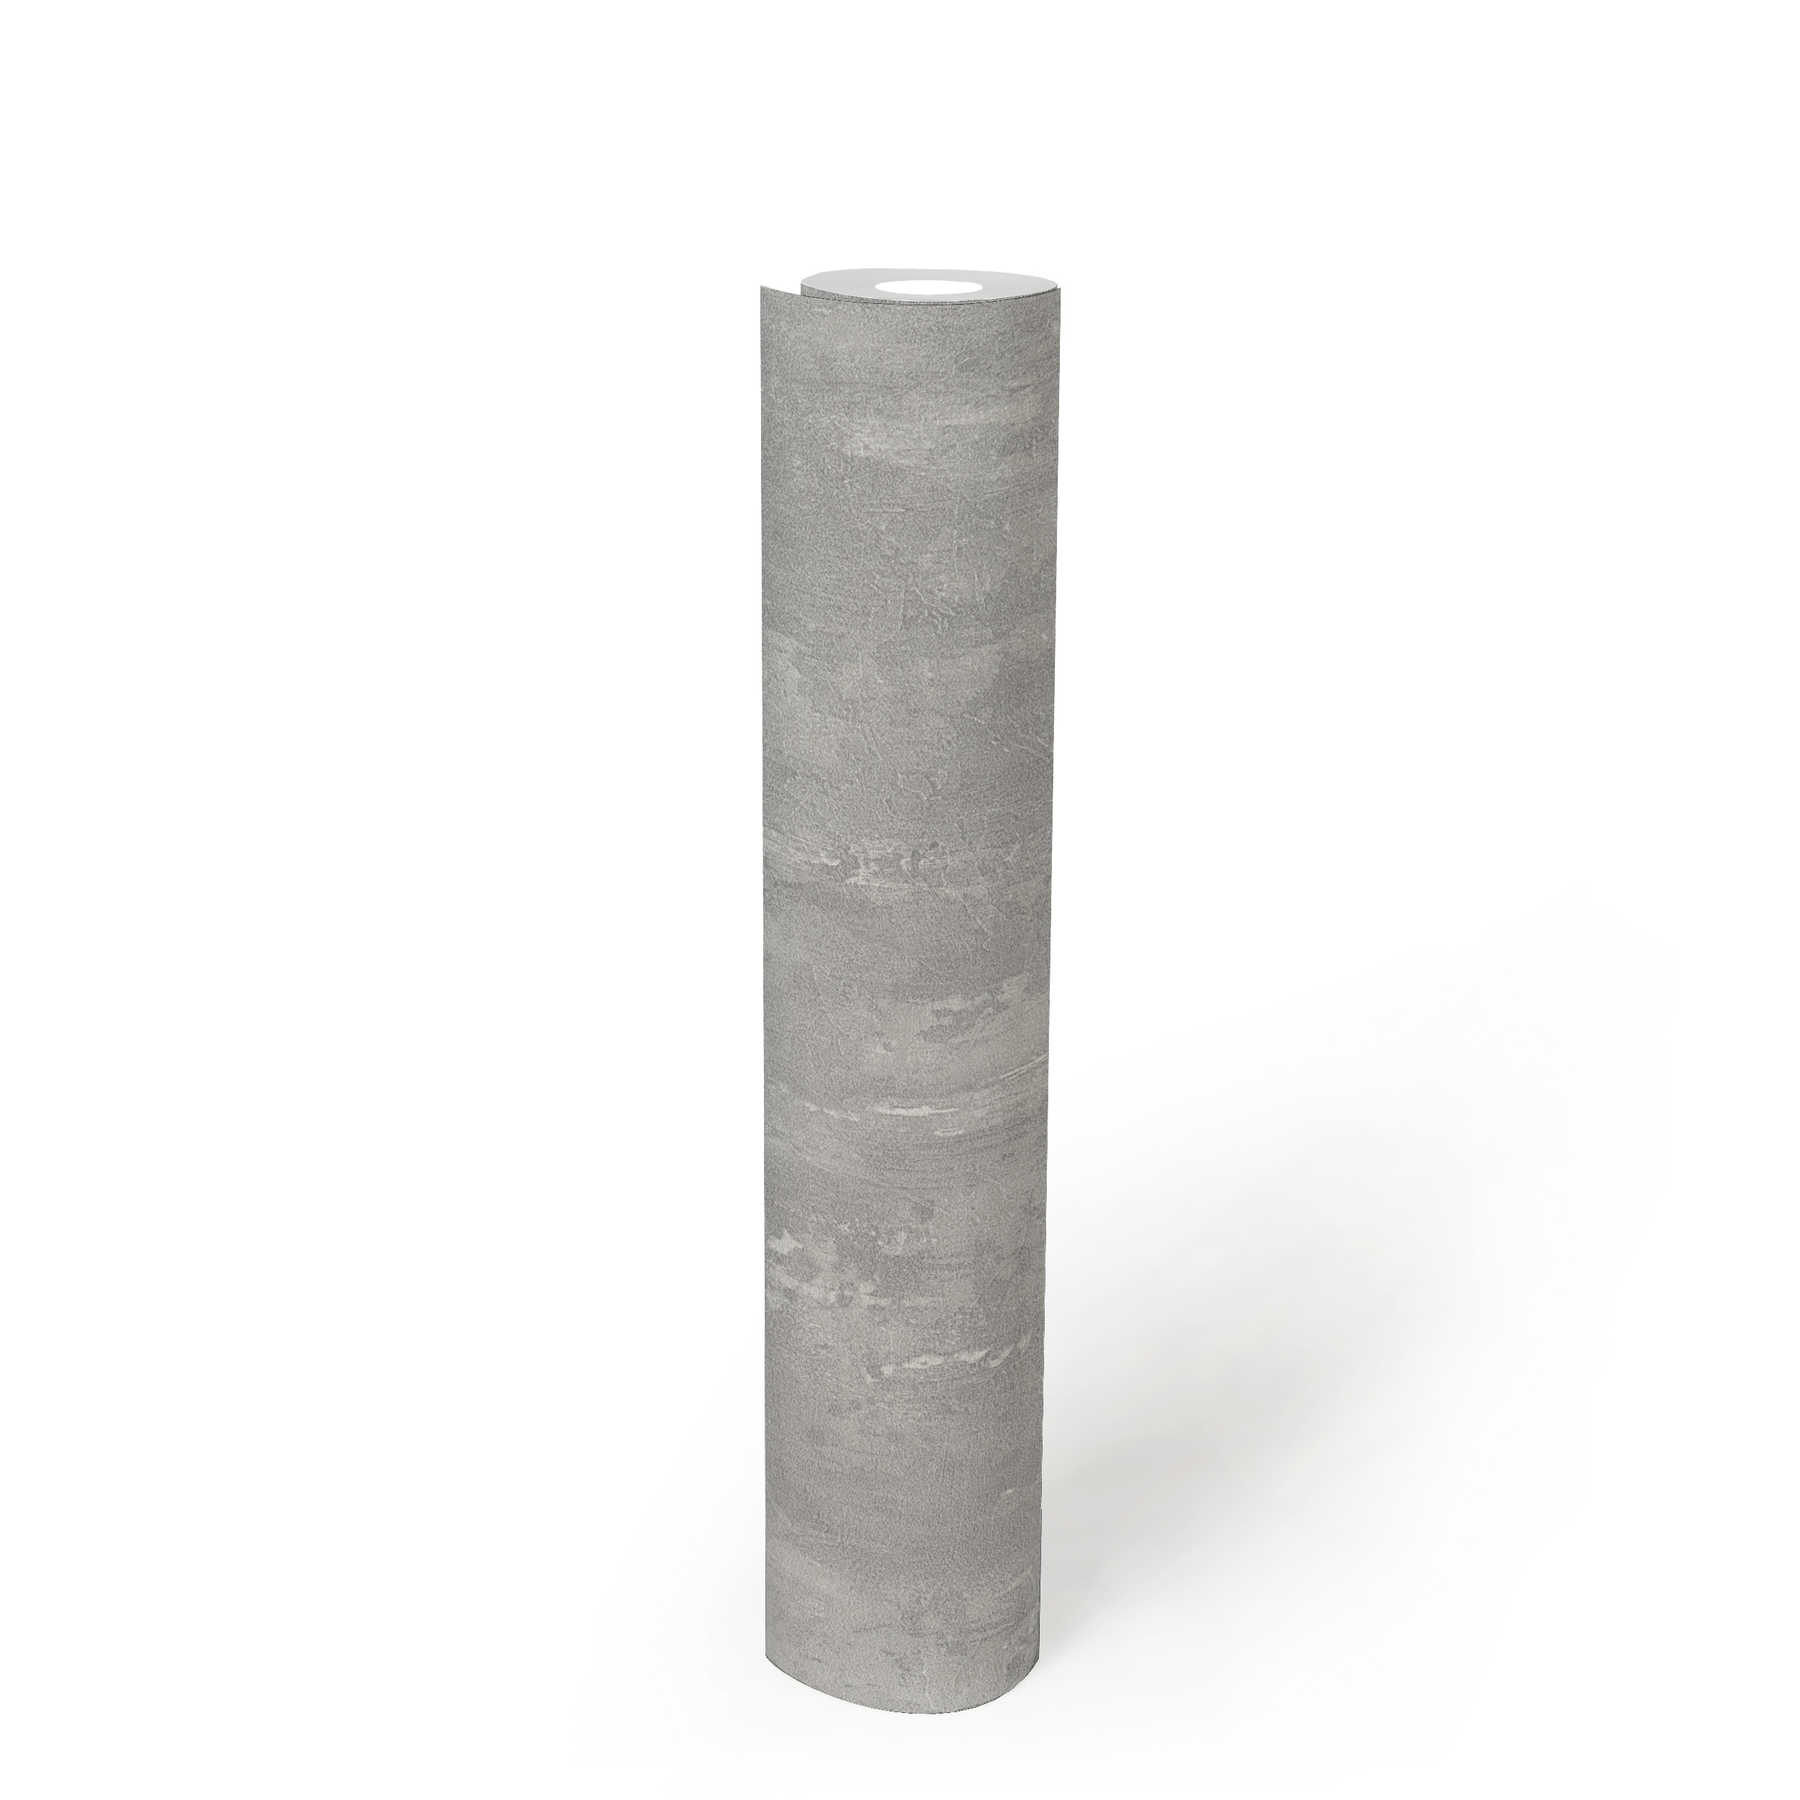             Wallpaper with plaster texture, concrete look and gradient - grey
        